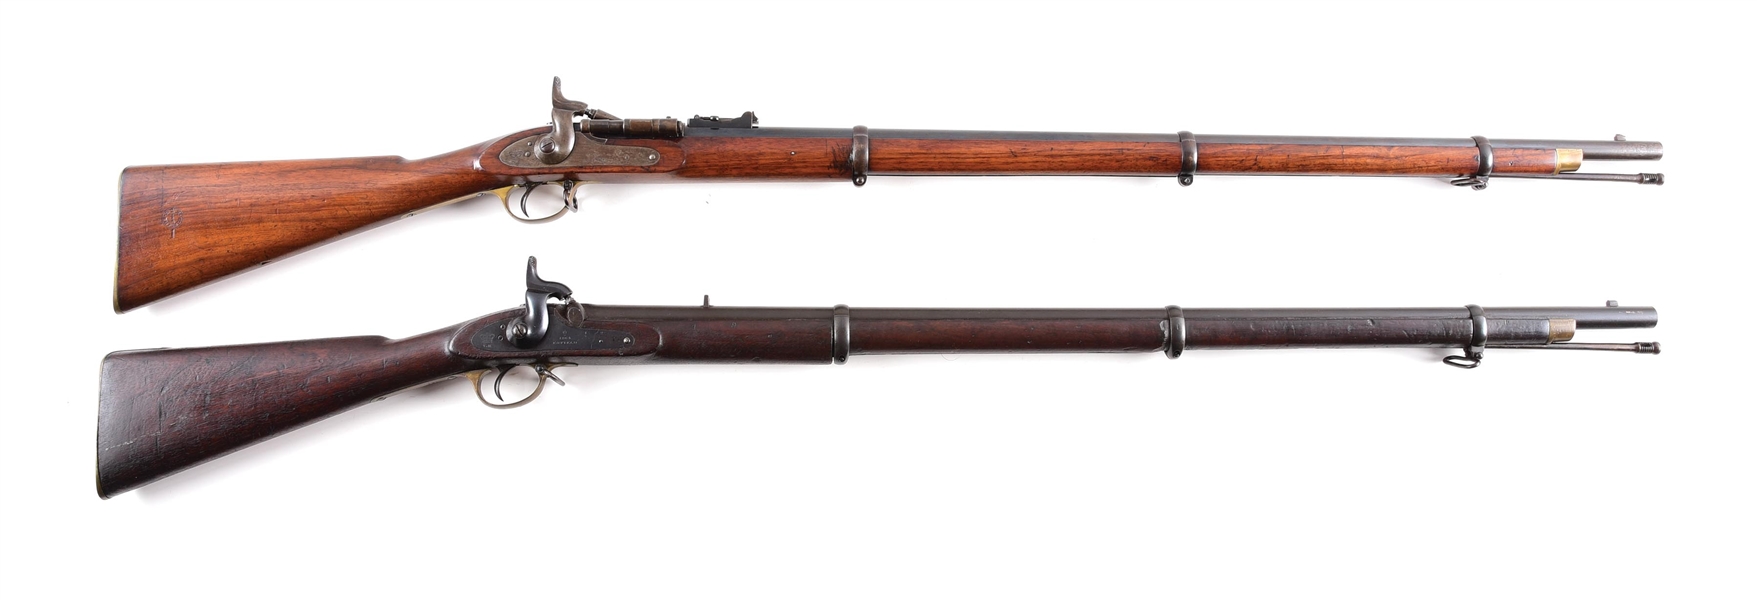 (A) LOT OF 2: ENFIELD SNIDER CONVERSION AND ENFIELD PERCUSSION RIFLES.